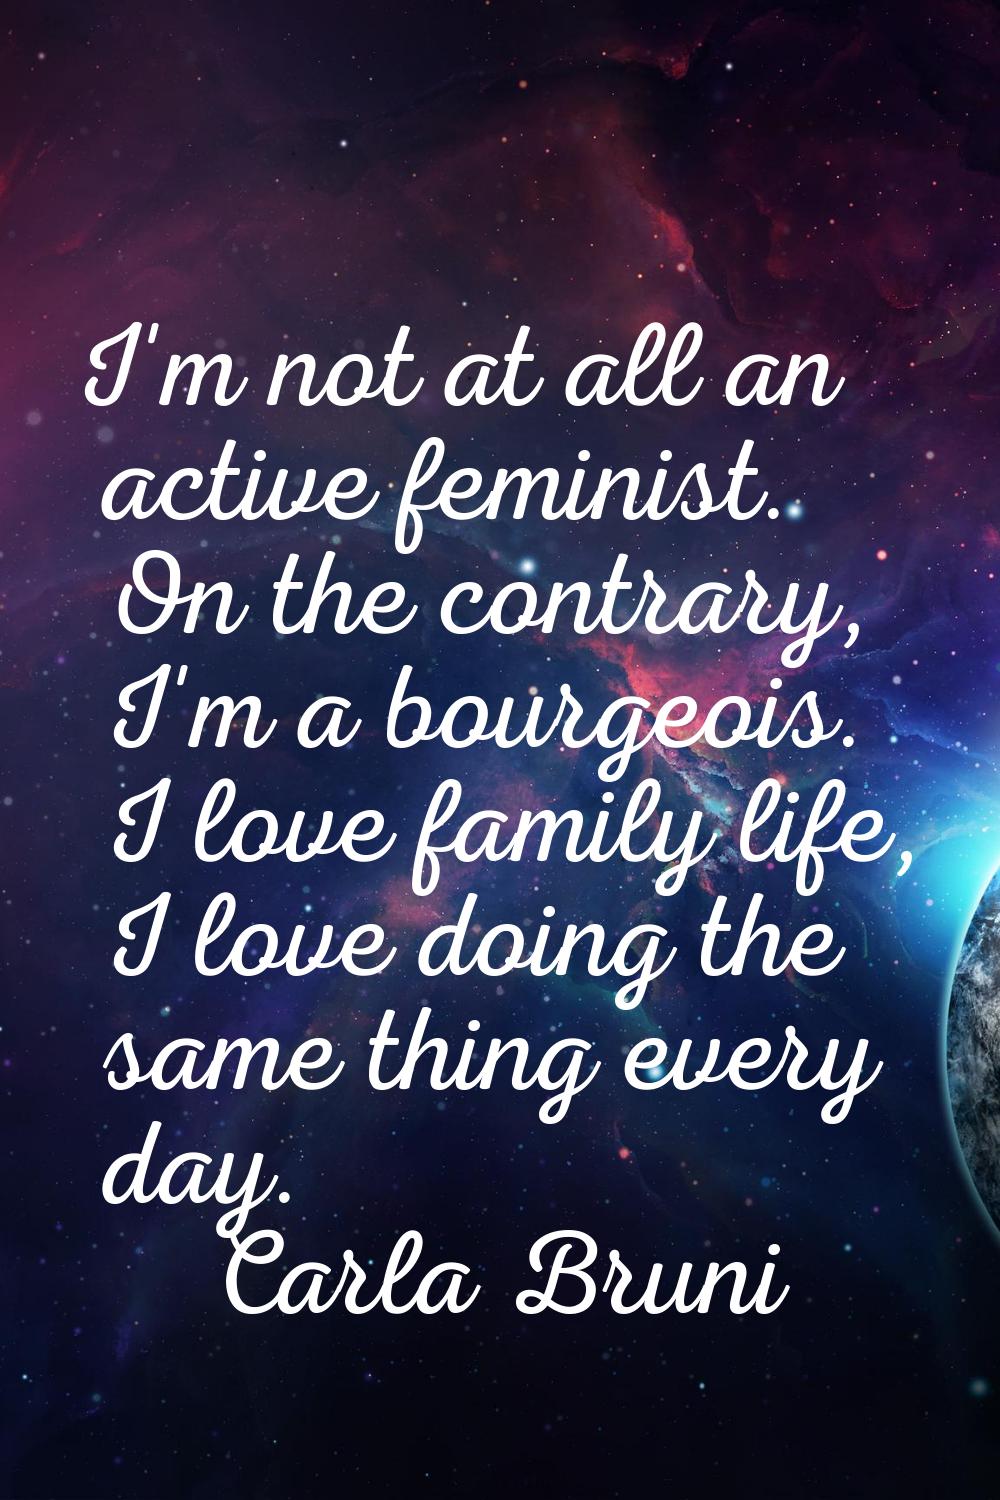 I'm not at all an active feminist. On the contrary, I'm a bourgeois. I love family life, I love doi